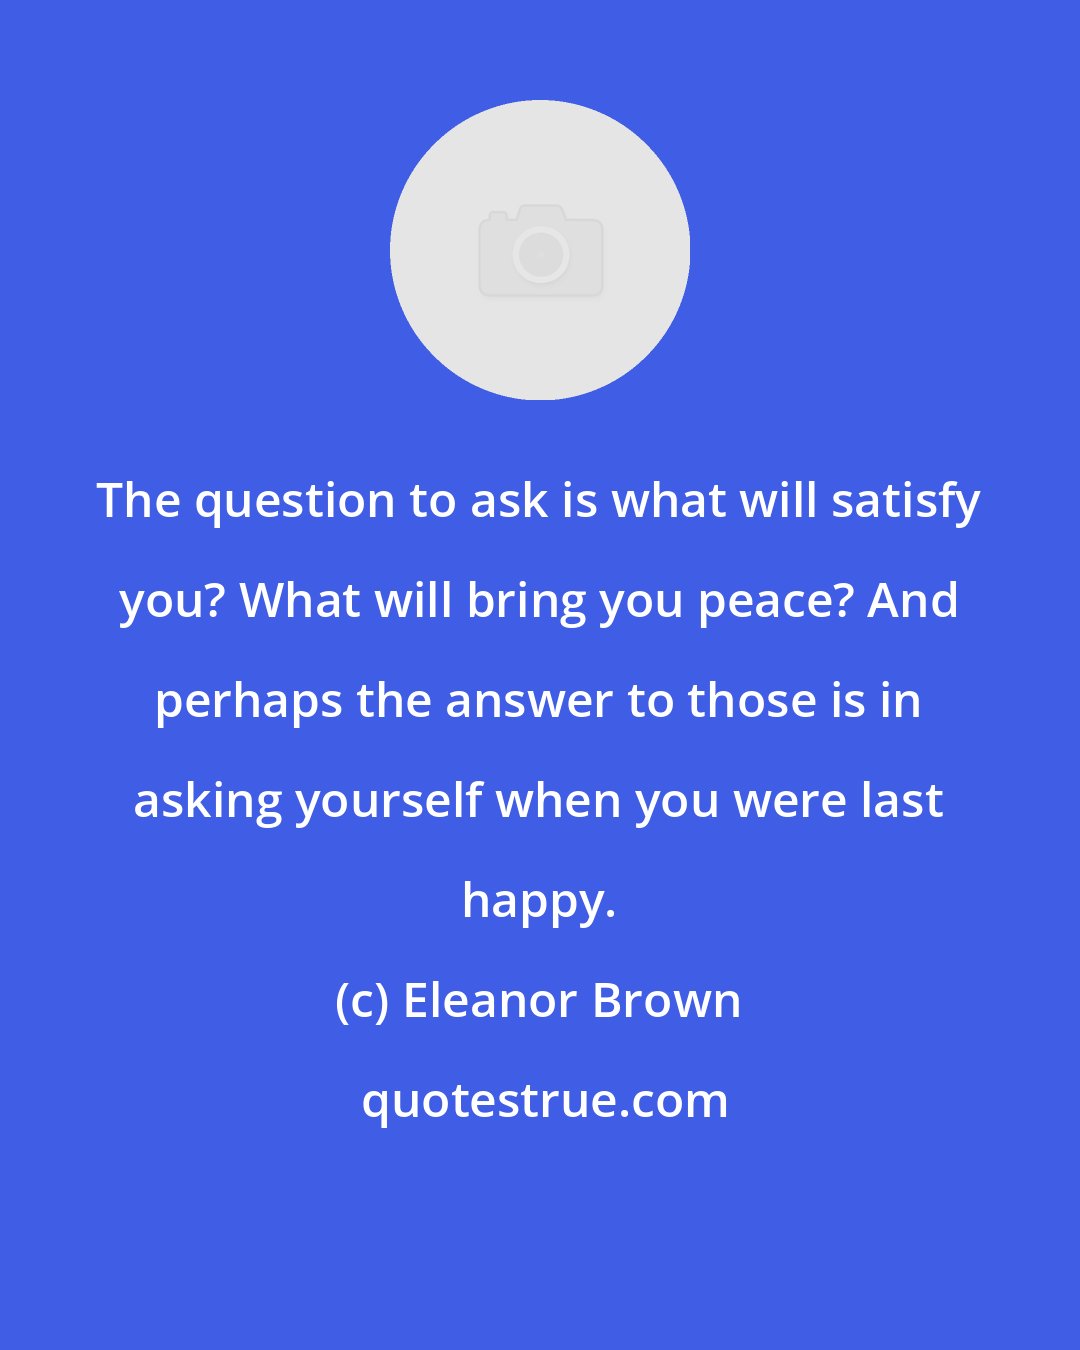 Eleanor Brown: The question to ask is what will satisfy you? What will bring you peace? And perhaps the answer to those is in asking yourself when you were last happy.